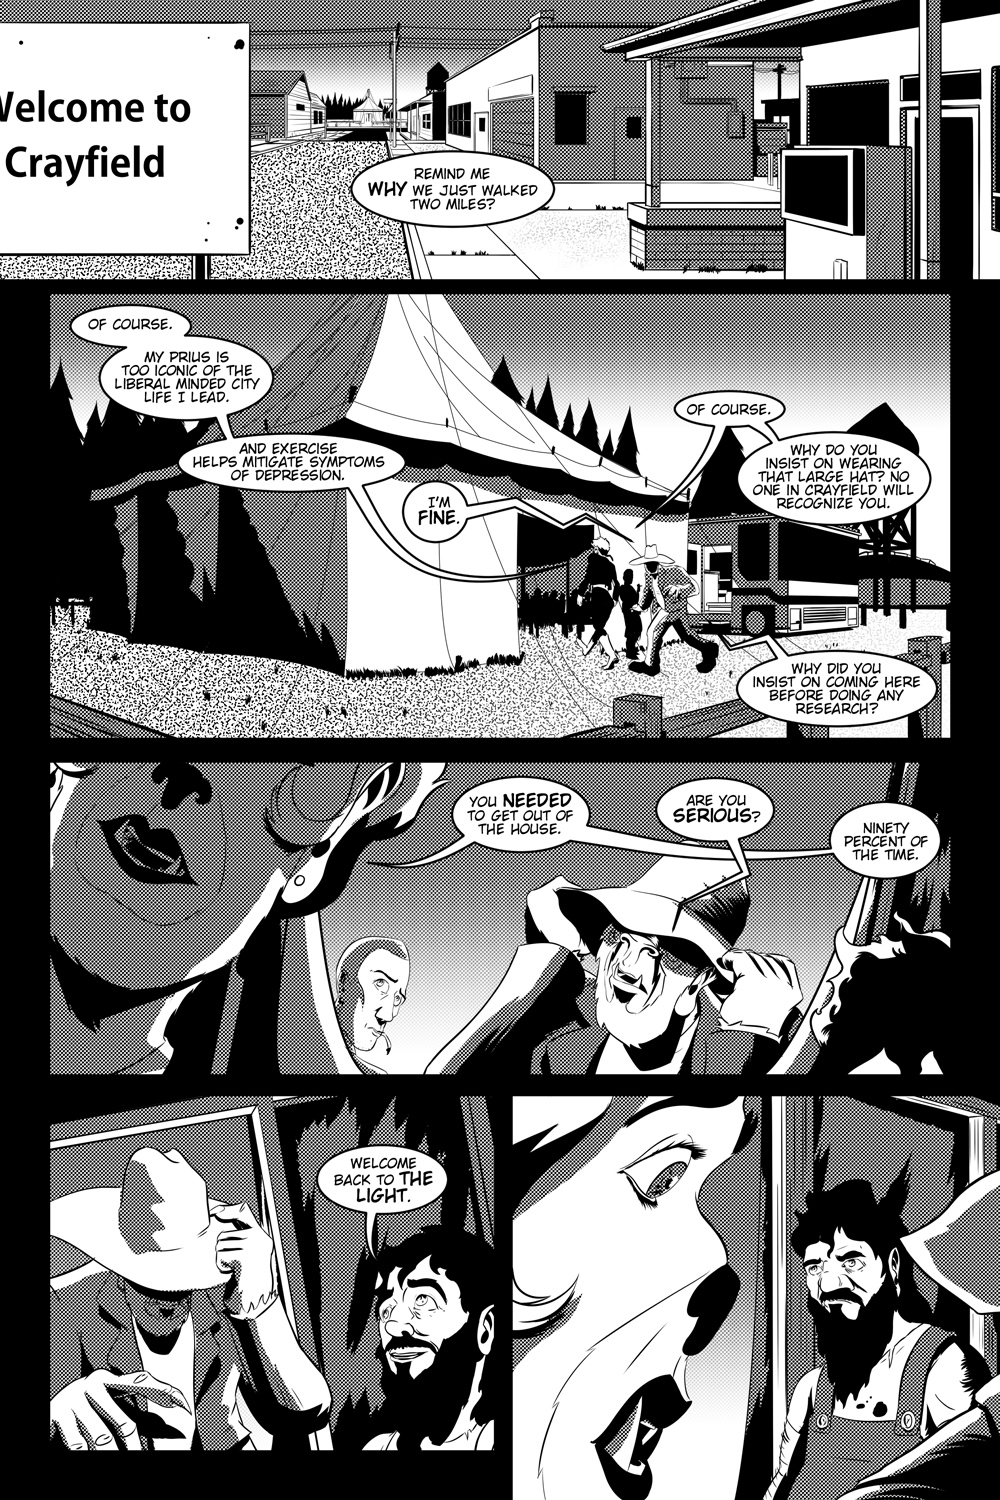 Flight of the Mothman! Issue 1 page 7